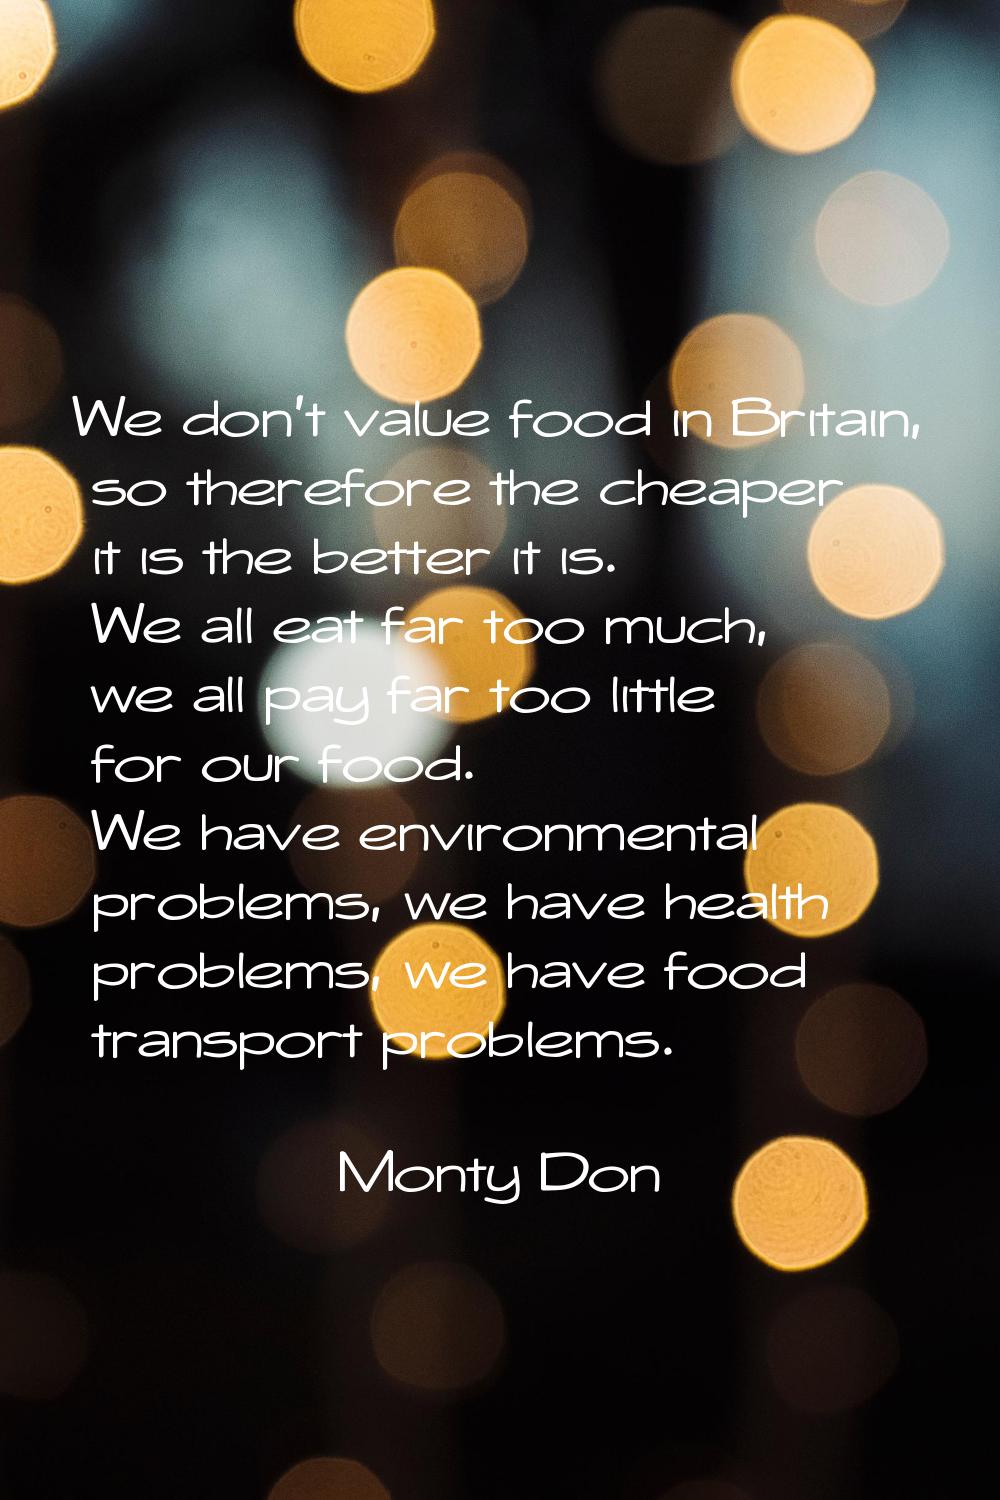 We don't value food in Britain, so therefore the cheaper it is the better it is. We all eat far too